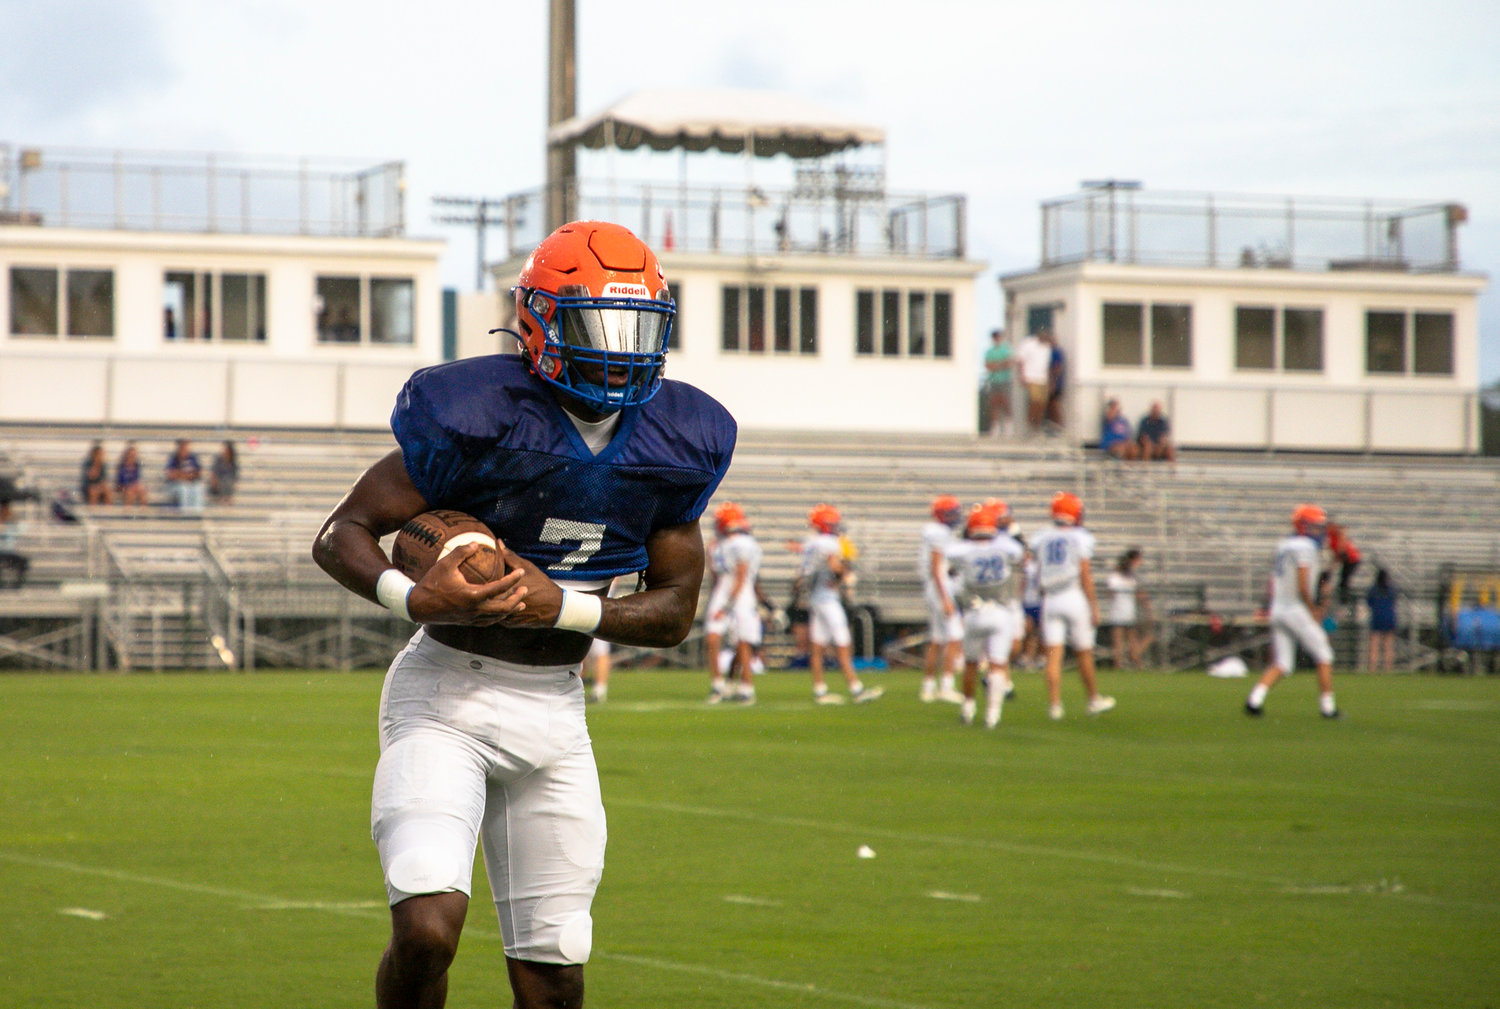 Orange Beach senior Chris Pearson goes through warmups ahead of the Meet the Makos intrasquad scrimmage at the Sportsplex Aug. 12. Pearson announced his recruitment as reopened after he decommitted from the UAB Blazers Wednesday, Nov. 30.